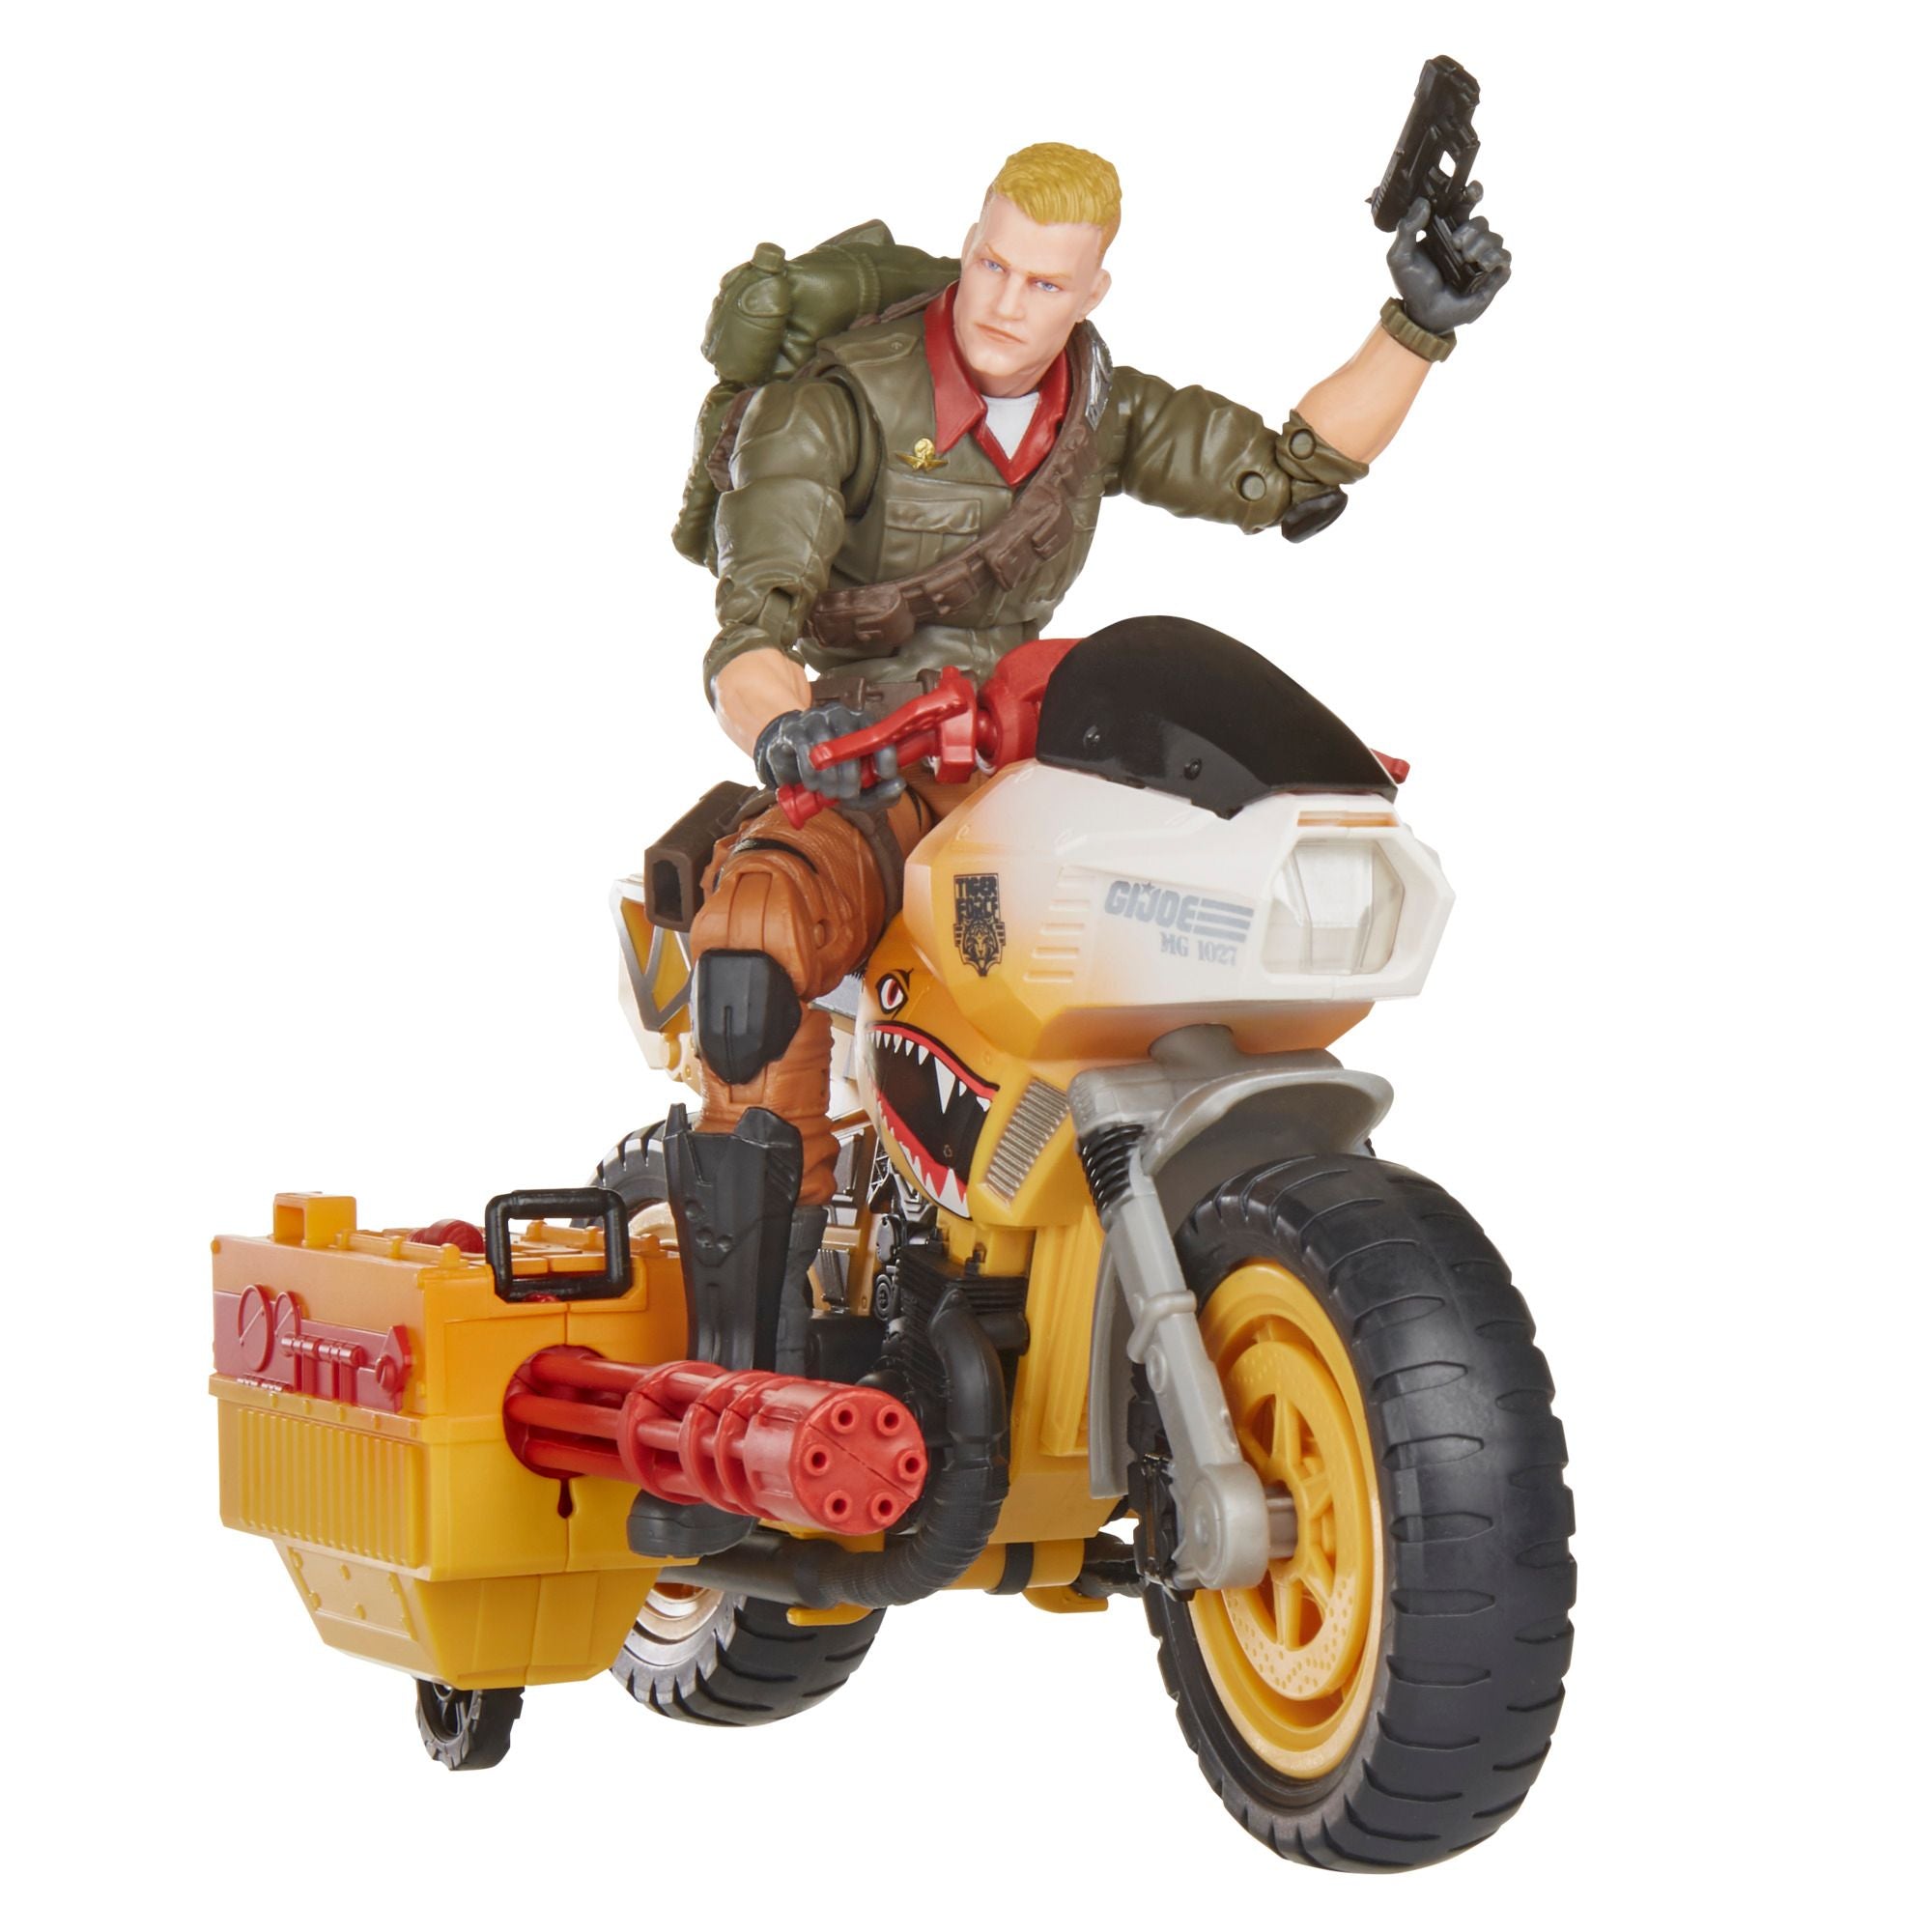 G.I. Joe Classified Tiger Force Duke & RAM Action Figure and Vehicle (Target Exclusive)